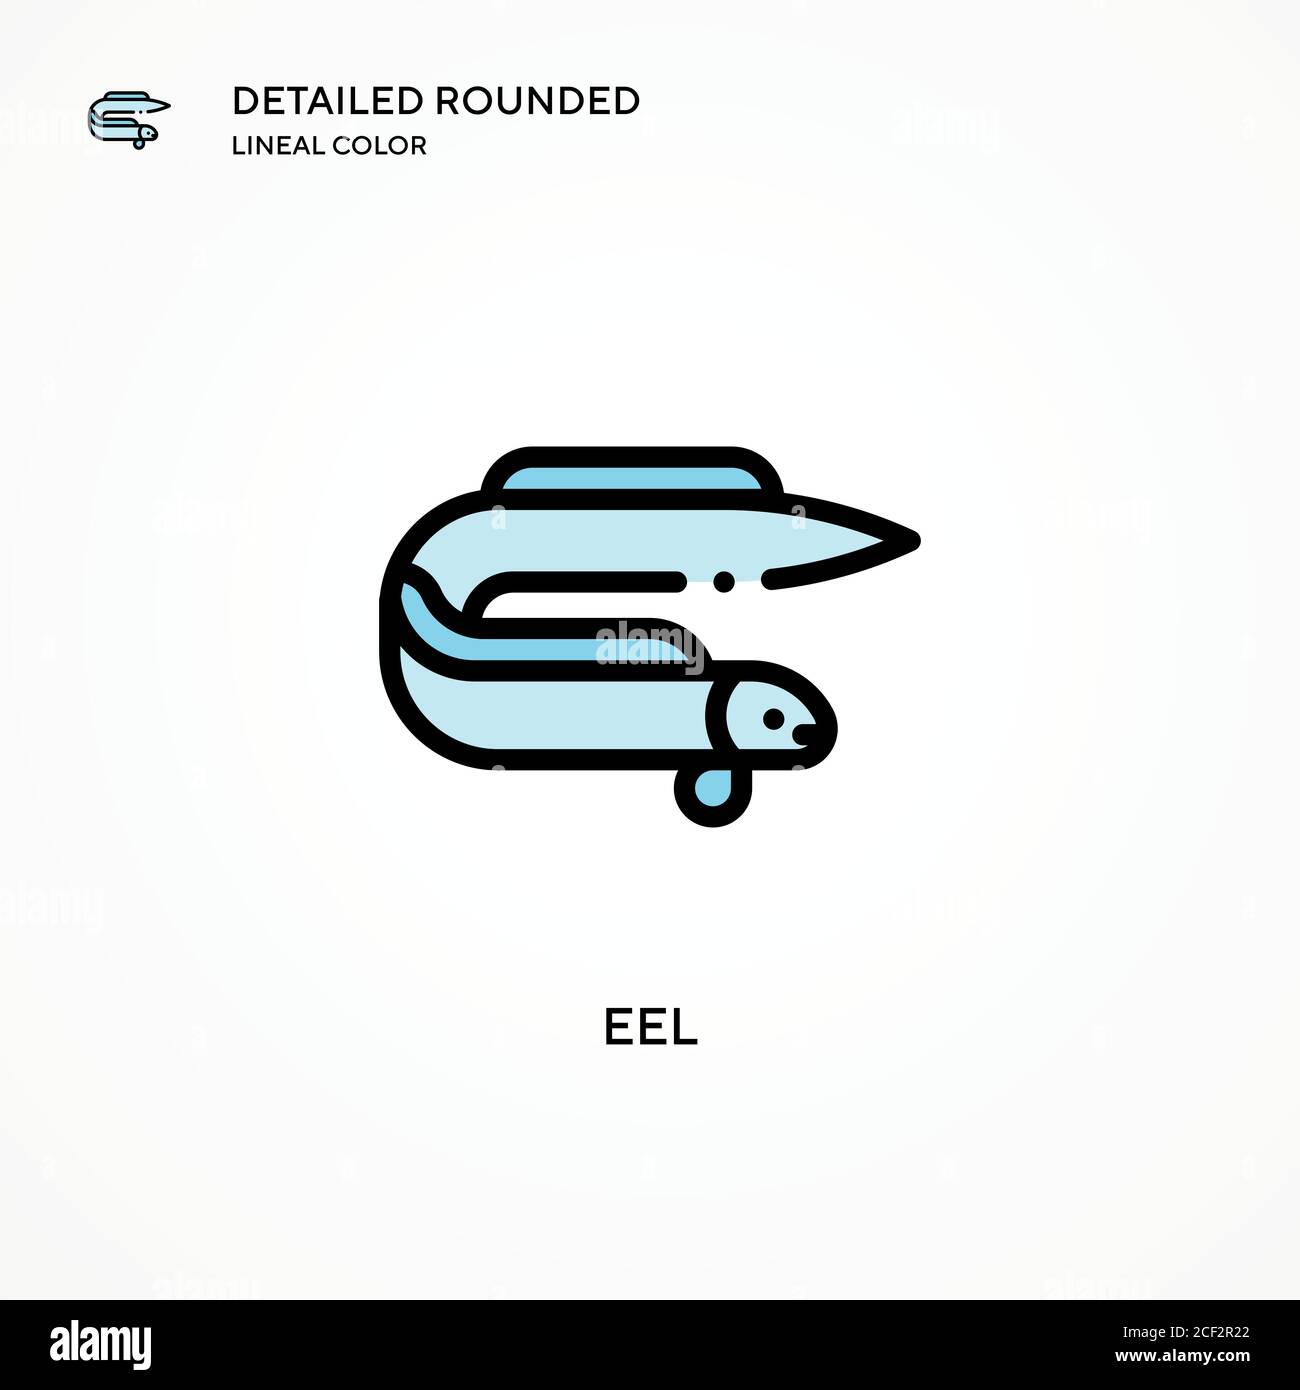 Eel vector icon. Modern vector illustration concepts. Easy to edit and customize. Stock Vector